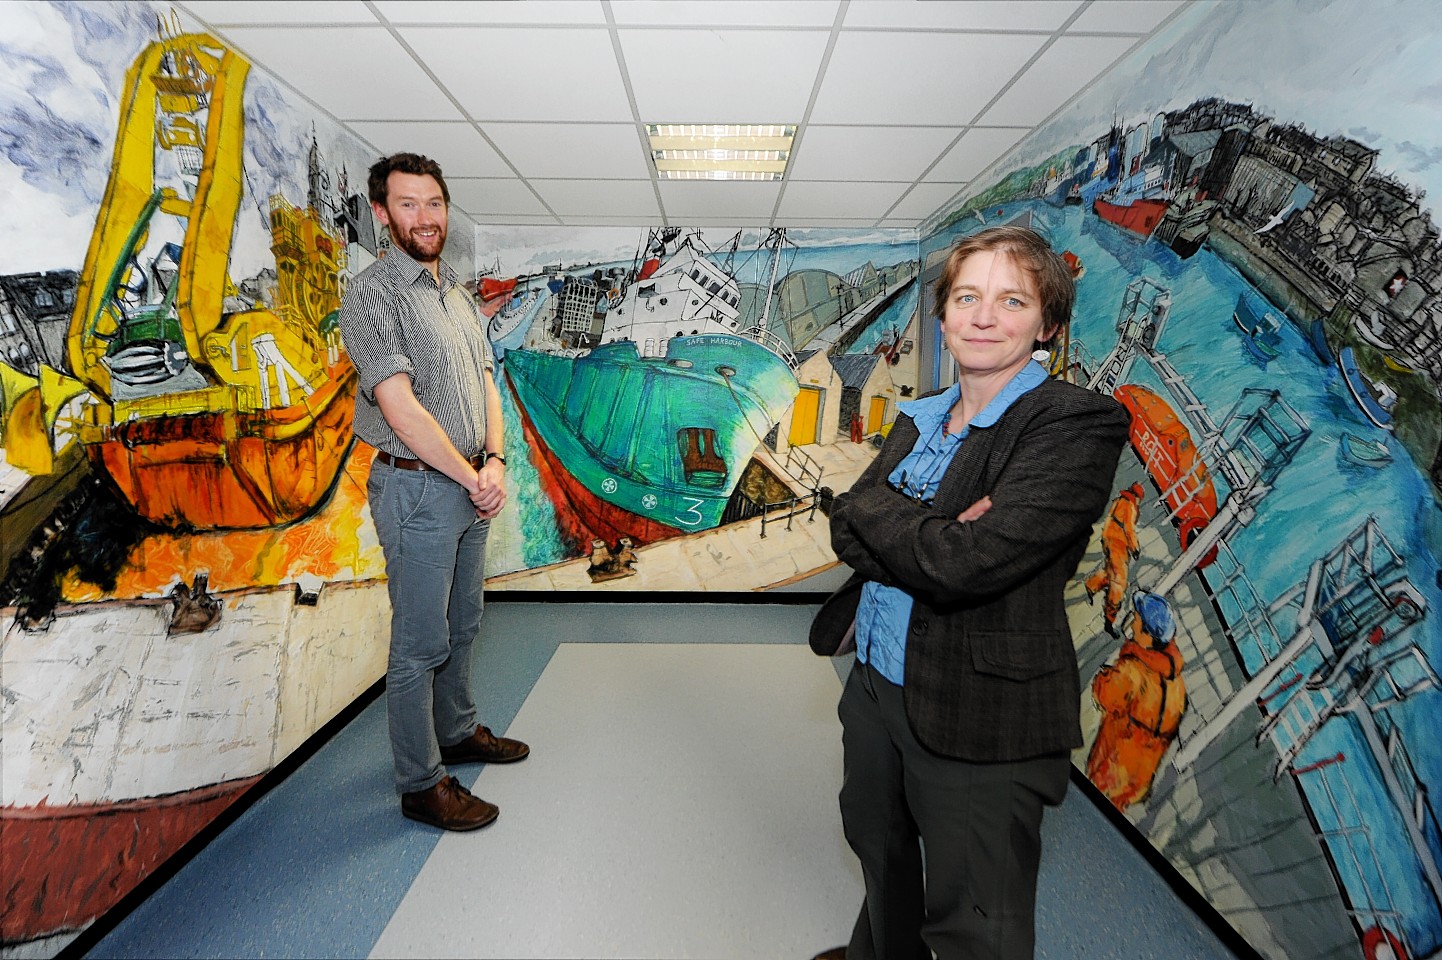 A fundraising drive is under way to repair and replenish thousands of pieces of art belonging to the Grampian Hospitals Art Trust.